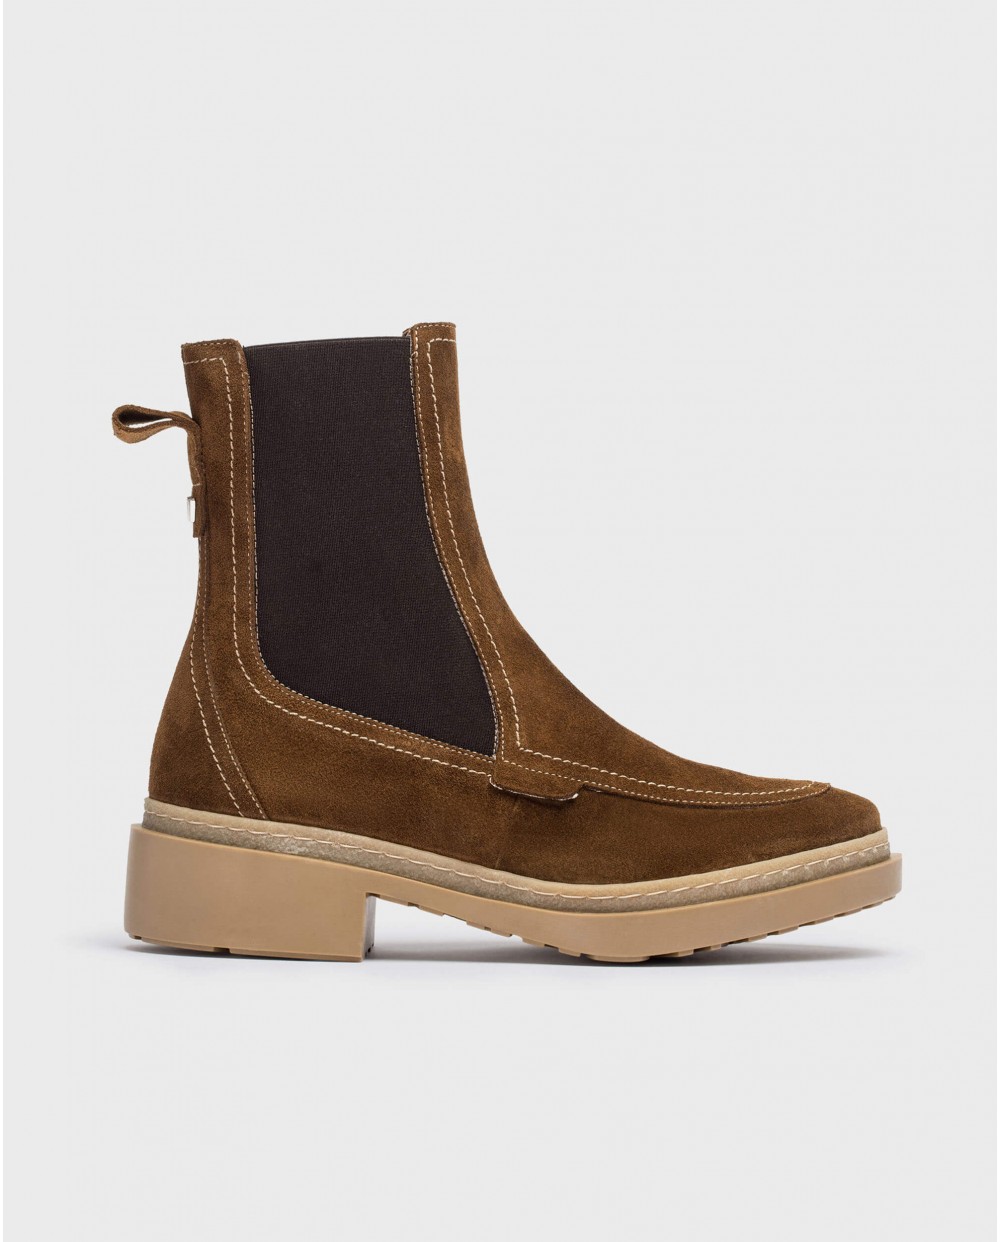 Wonders-Ankle Boots-Brown Kenny ankle boot